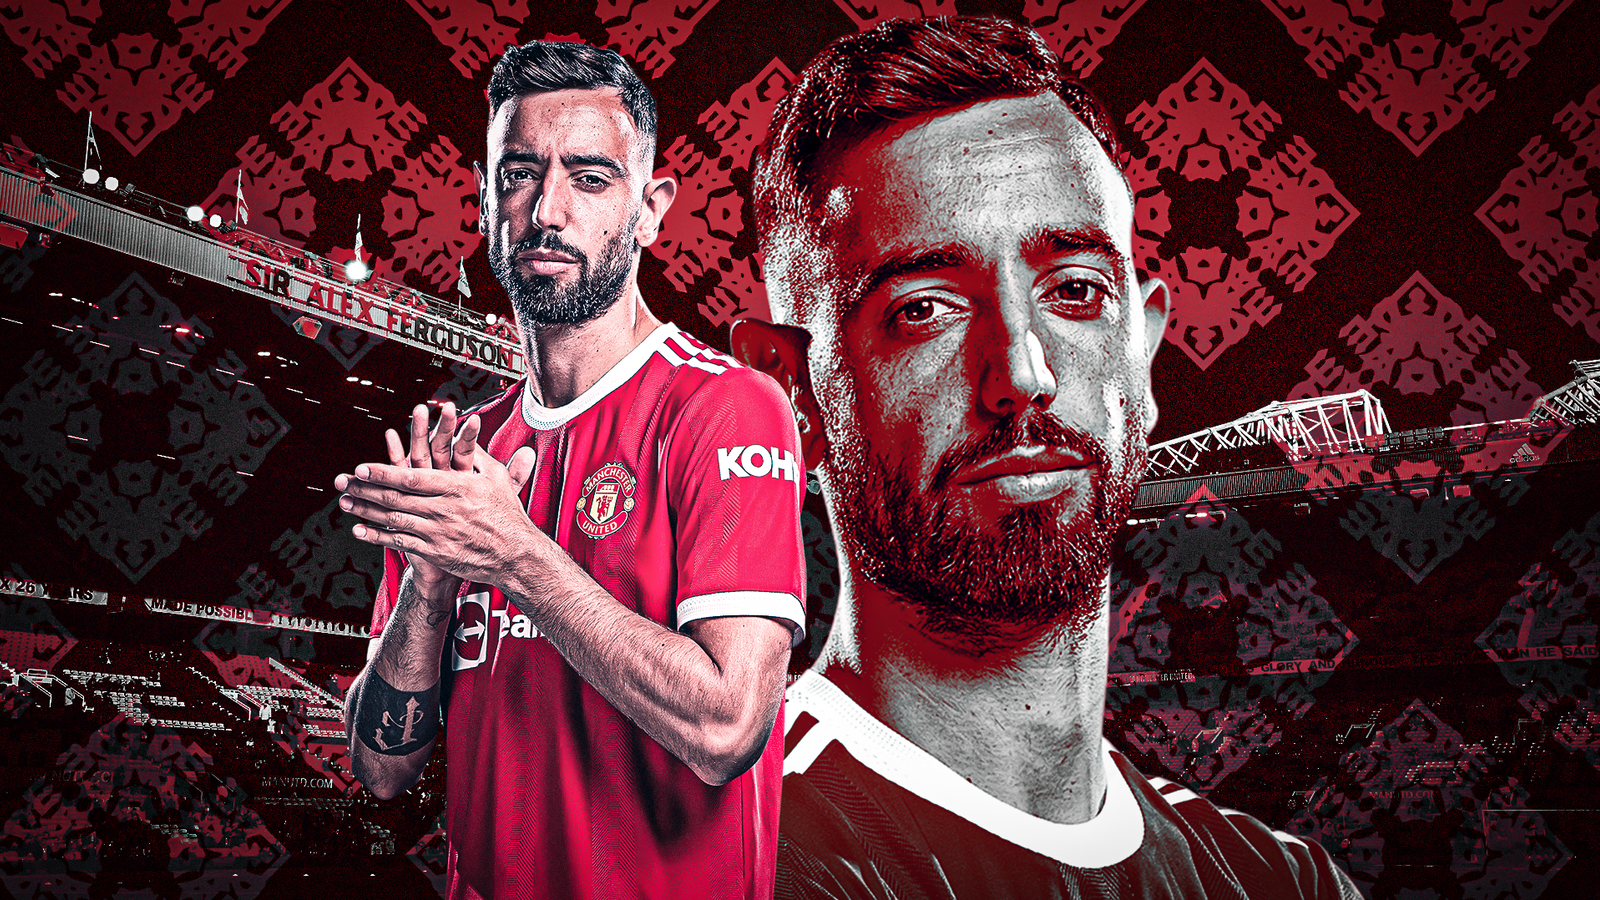 Will Bruno Fernandes need to change his style of play under Erik ten Hag? Analysis of his record at Manchester United